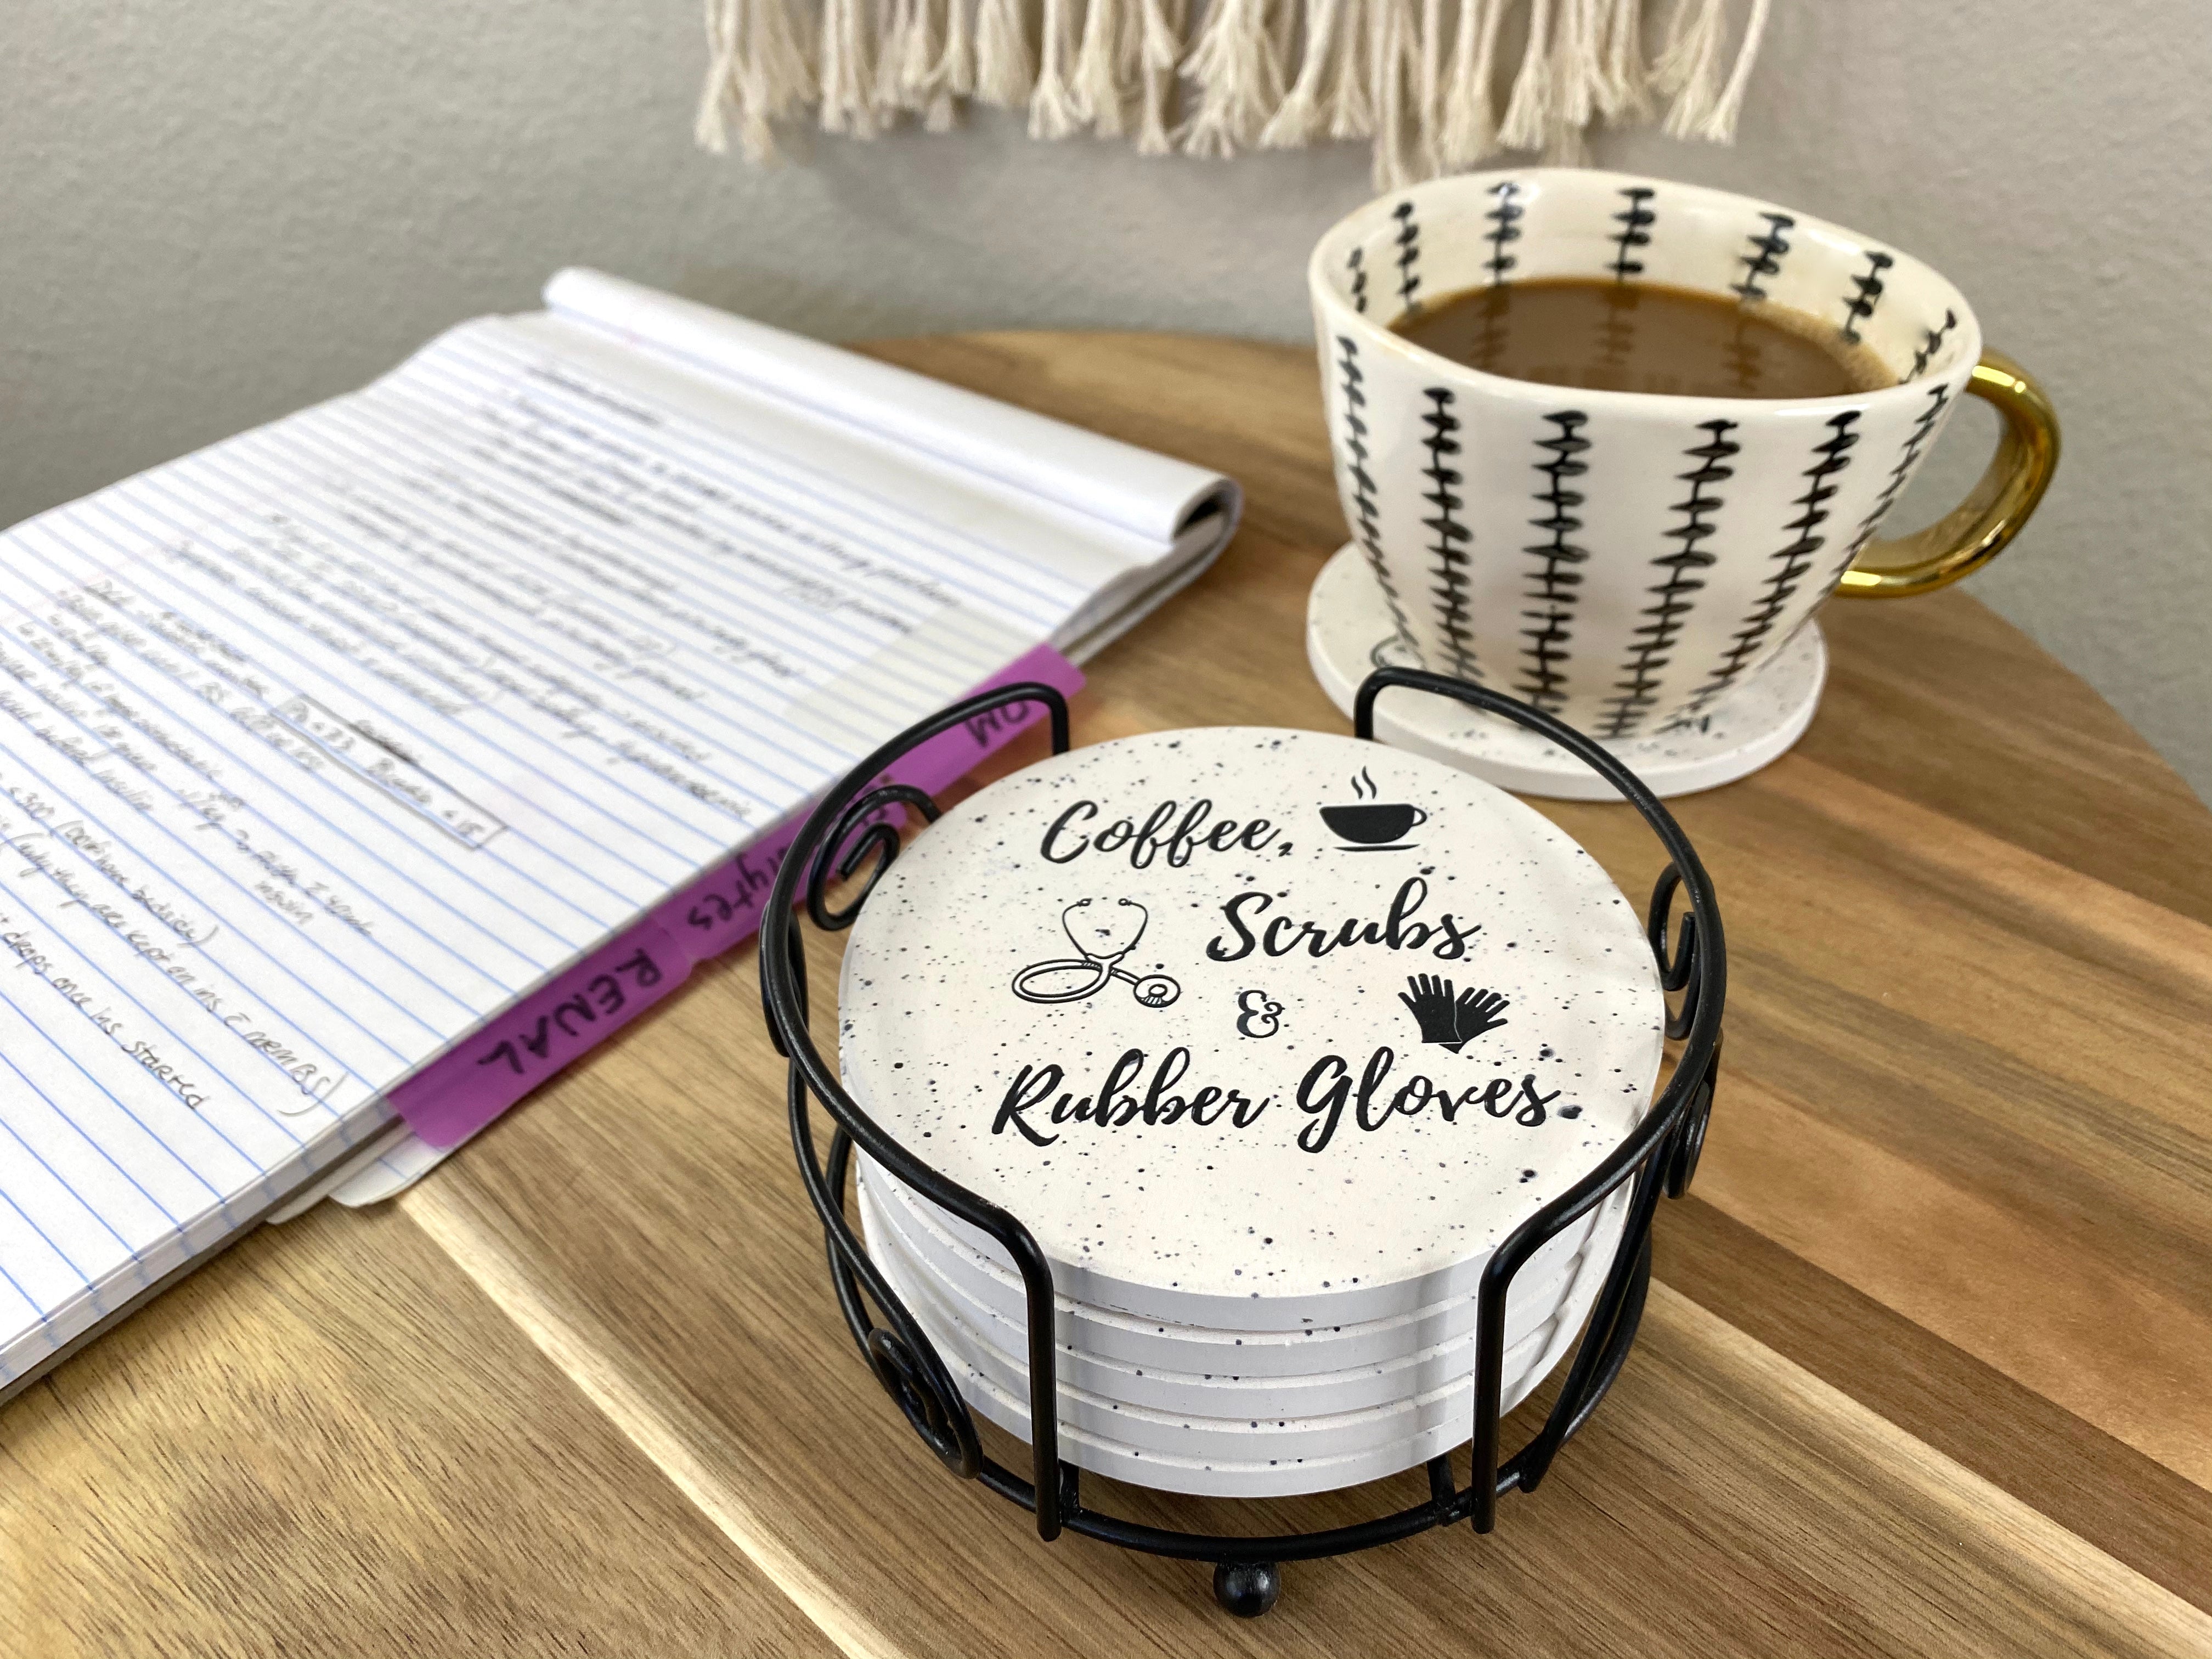 Absorbent Ceramic Coasters with Cork Base - Nurse Gifts for Women or Men - Holder Included (Sincere) - KCT Store